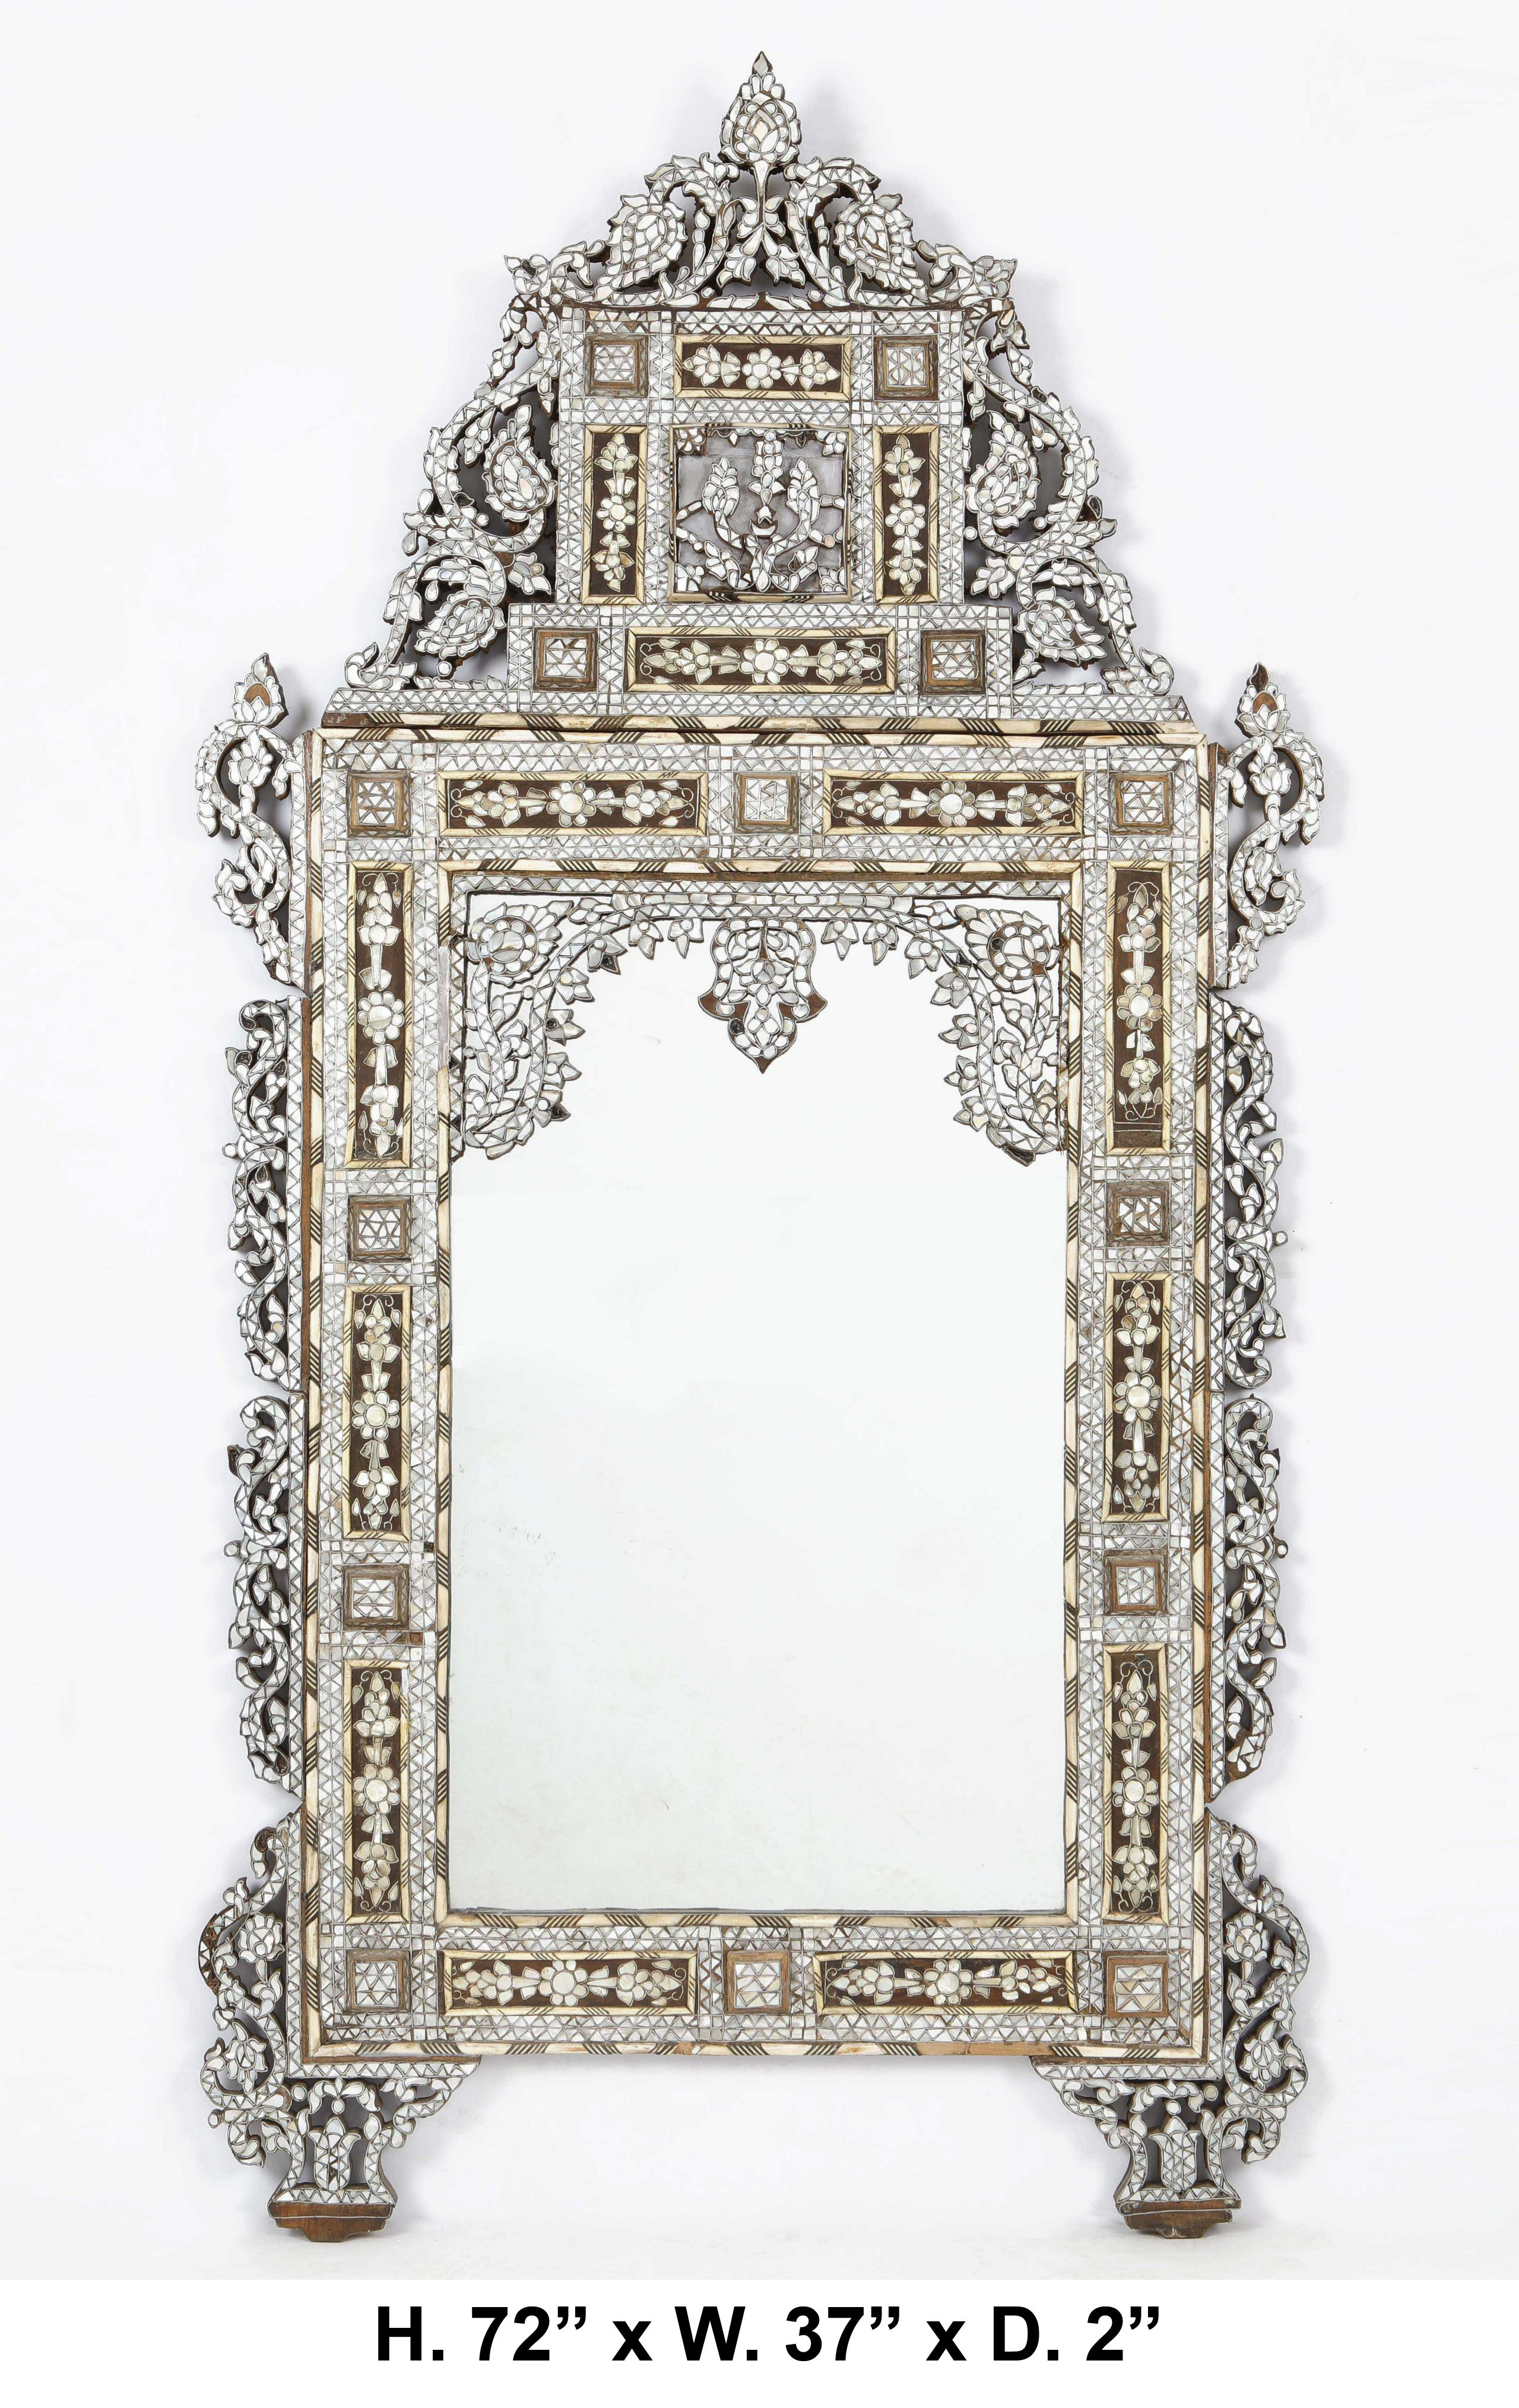 Sensational and large Levantine mother of pearl and pewter inlaid mirror, late 19th/early 20th century. possibly Moorish 
The whole mirror is finely inlaid with mother of pearl, each piece of mother of pearl is out lined with pewter is out lined